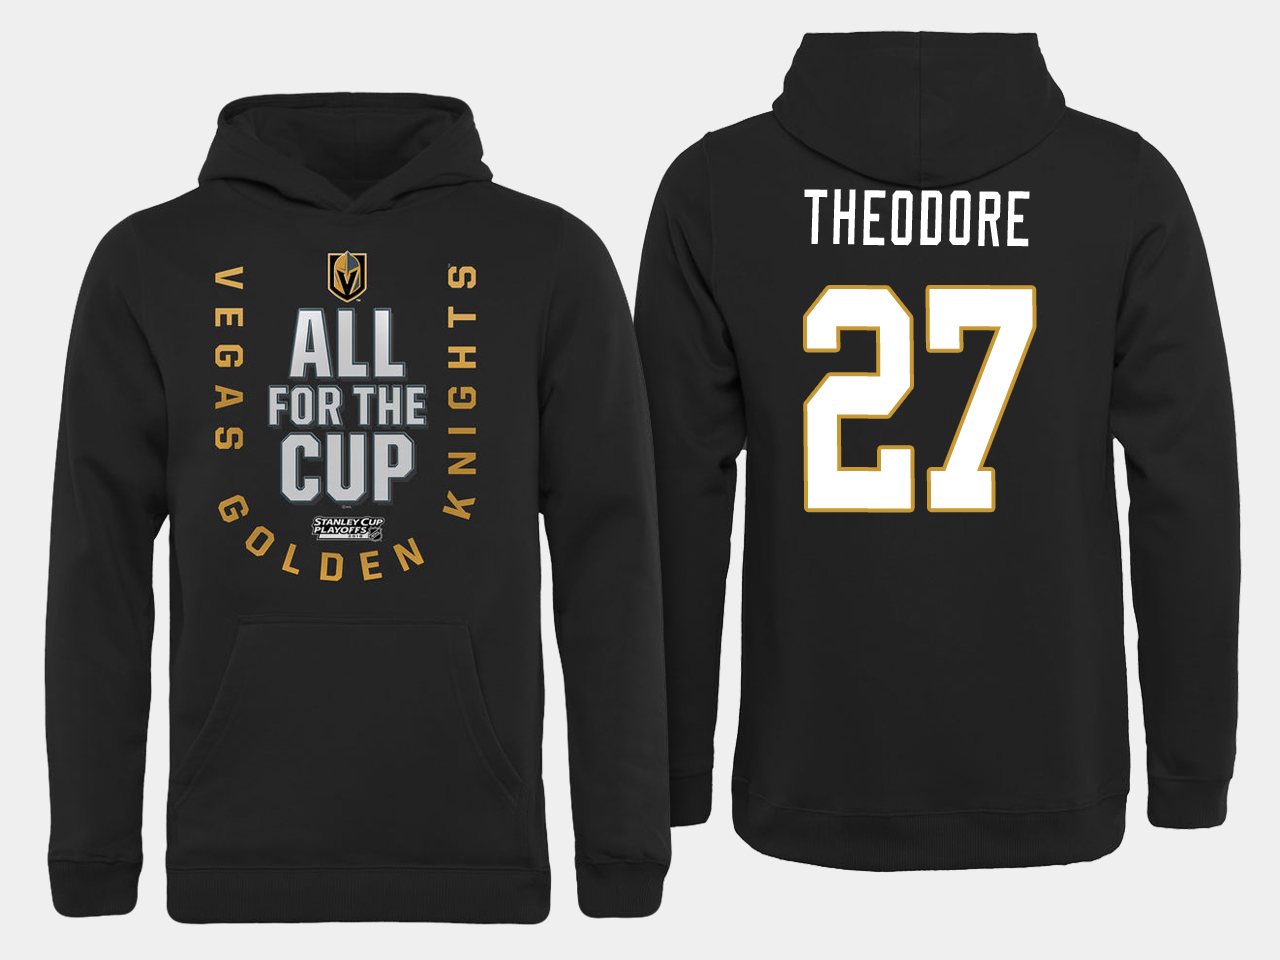 Men NHL Vegas Golden Knights 27 Theodore All for the Cup hoodie